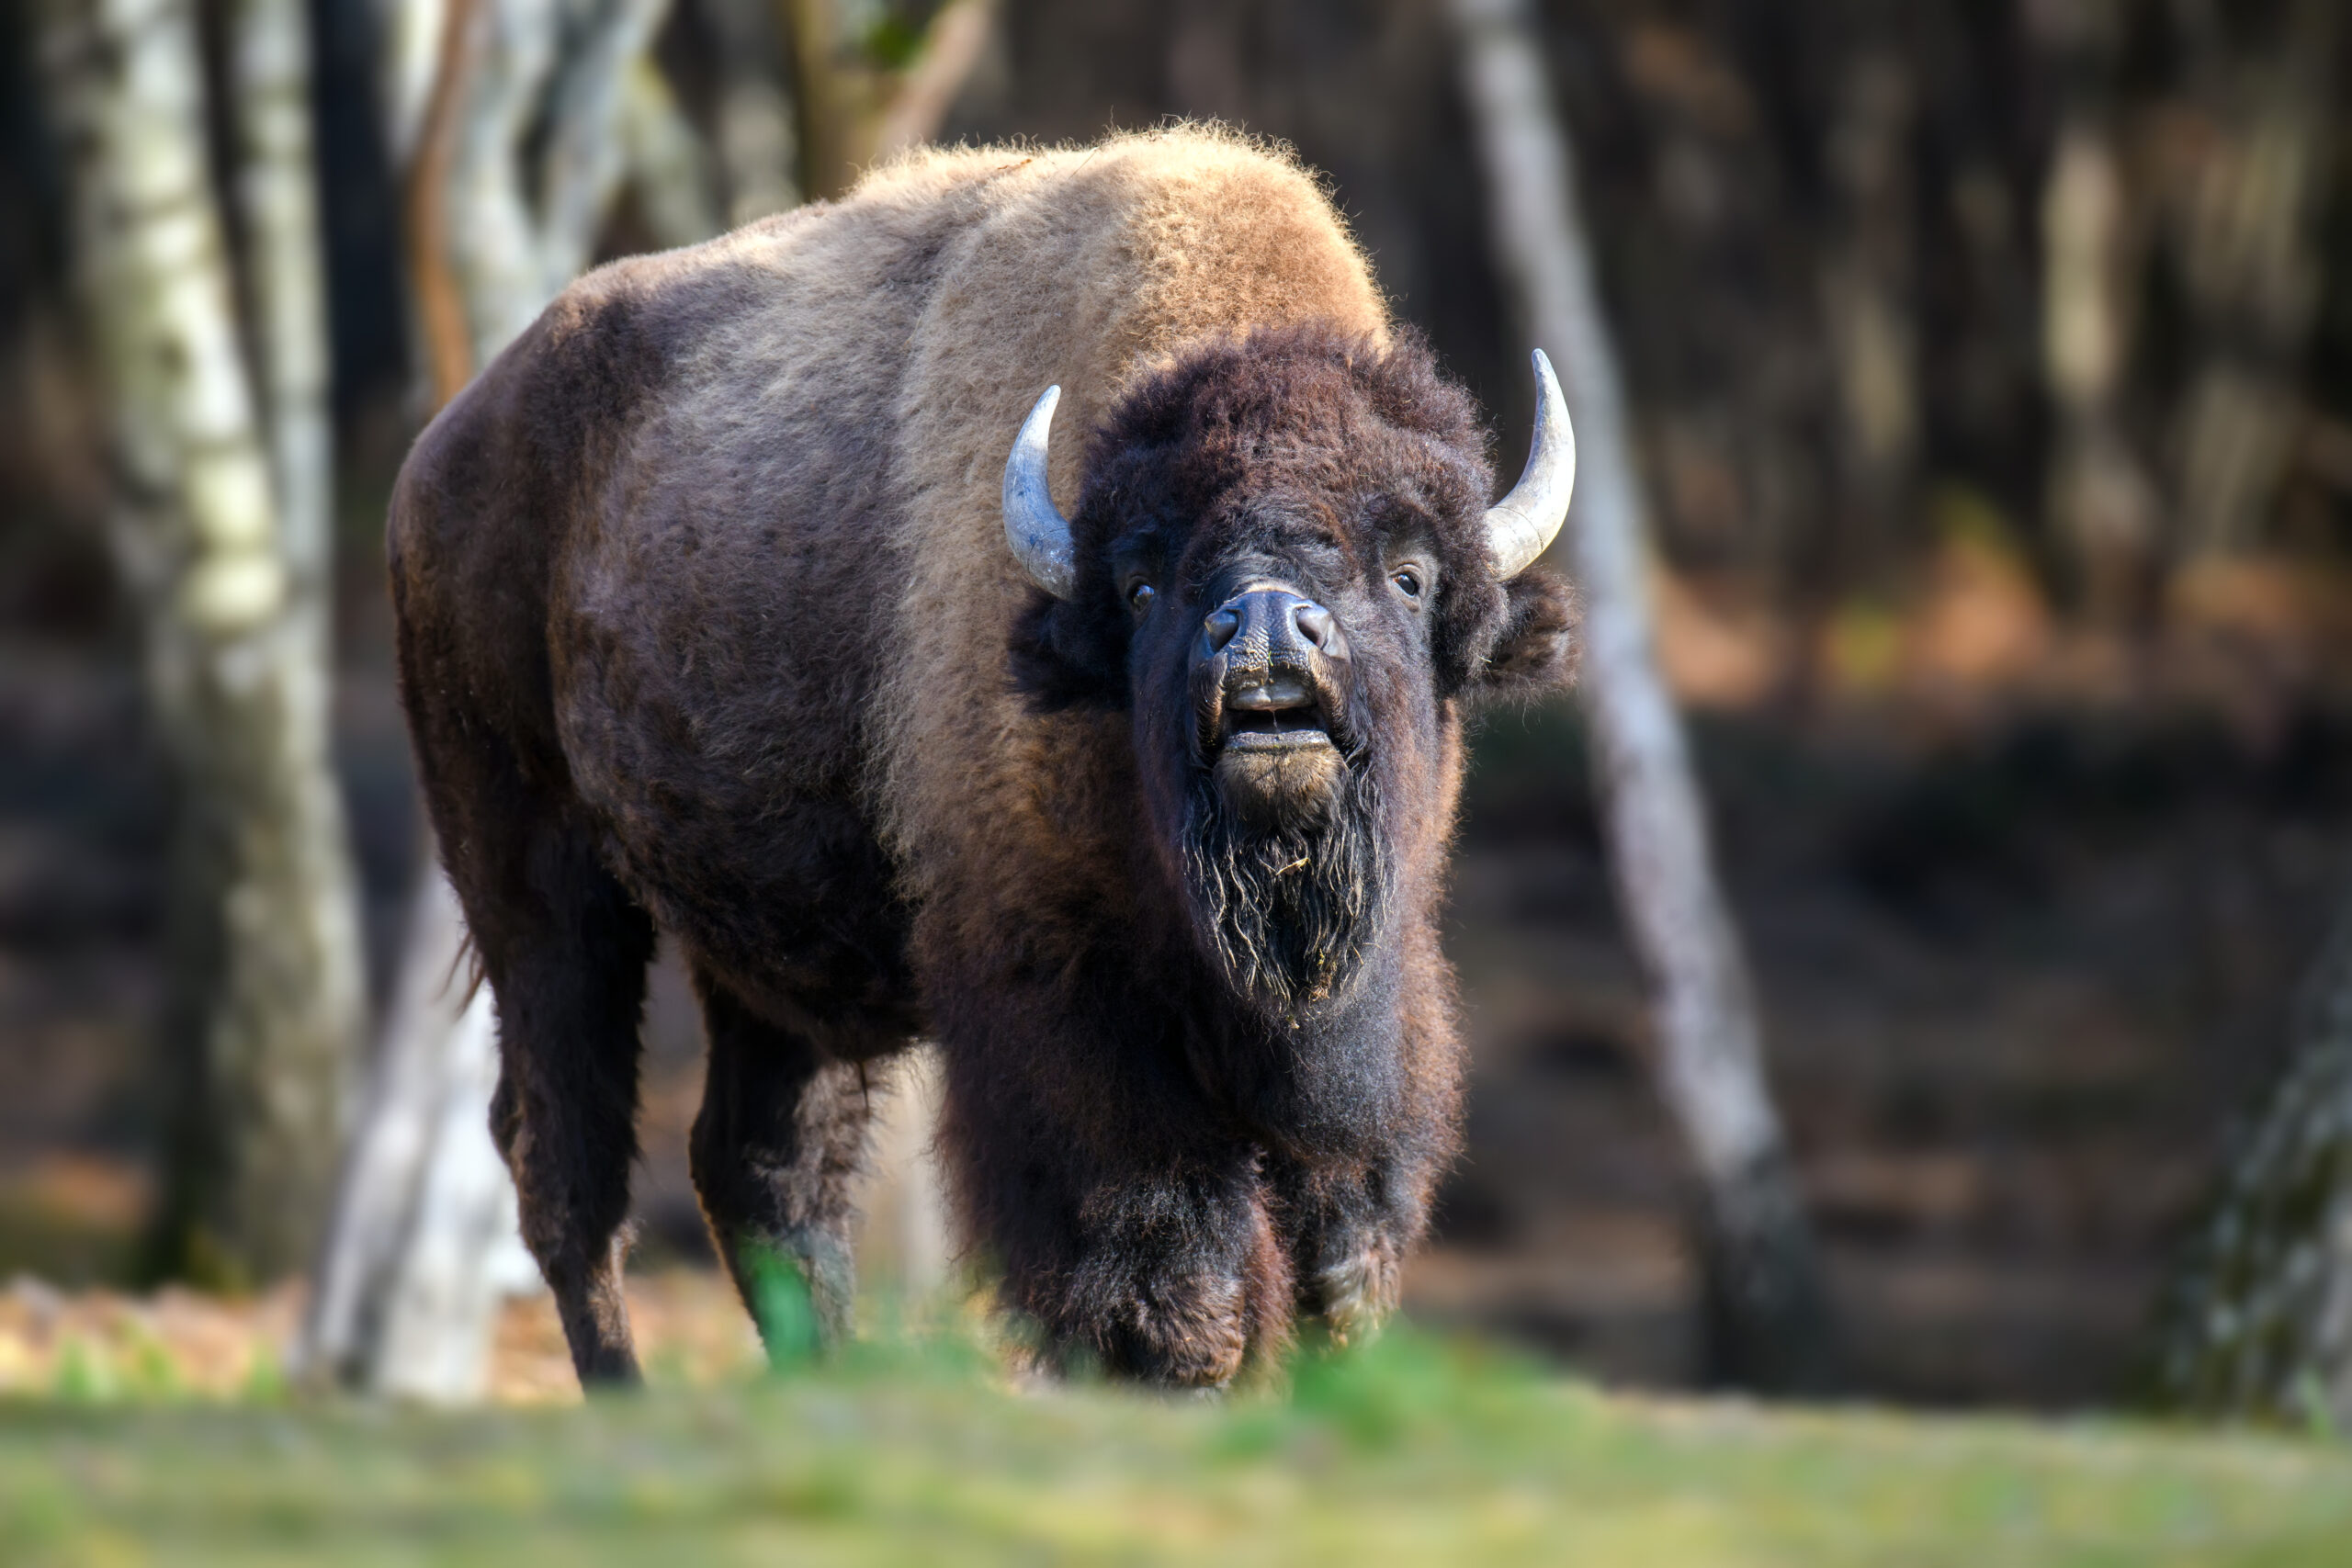 What Biome Do Bison Live In